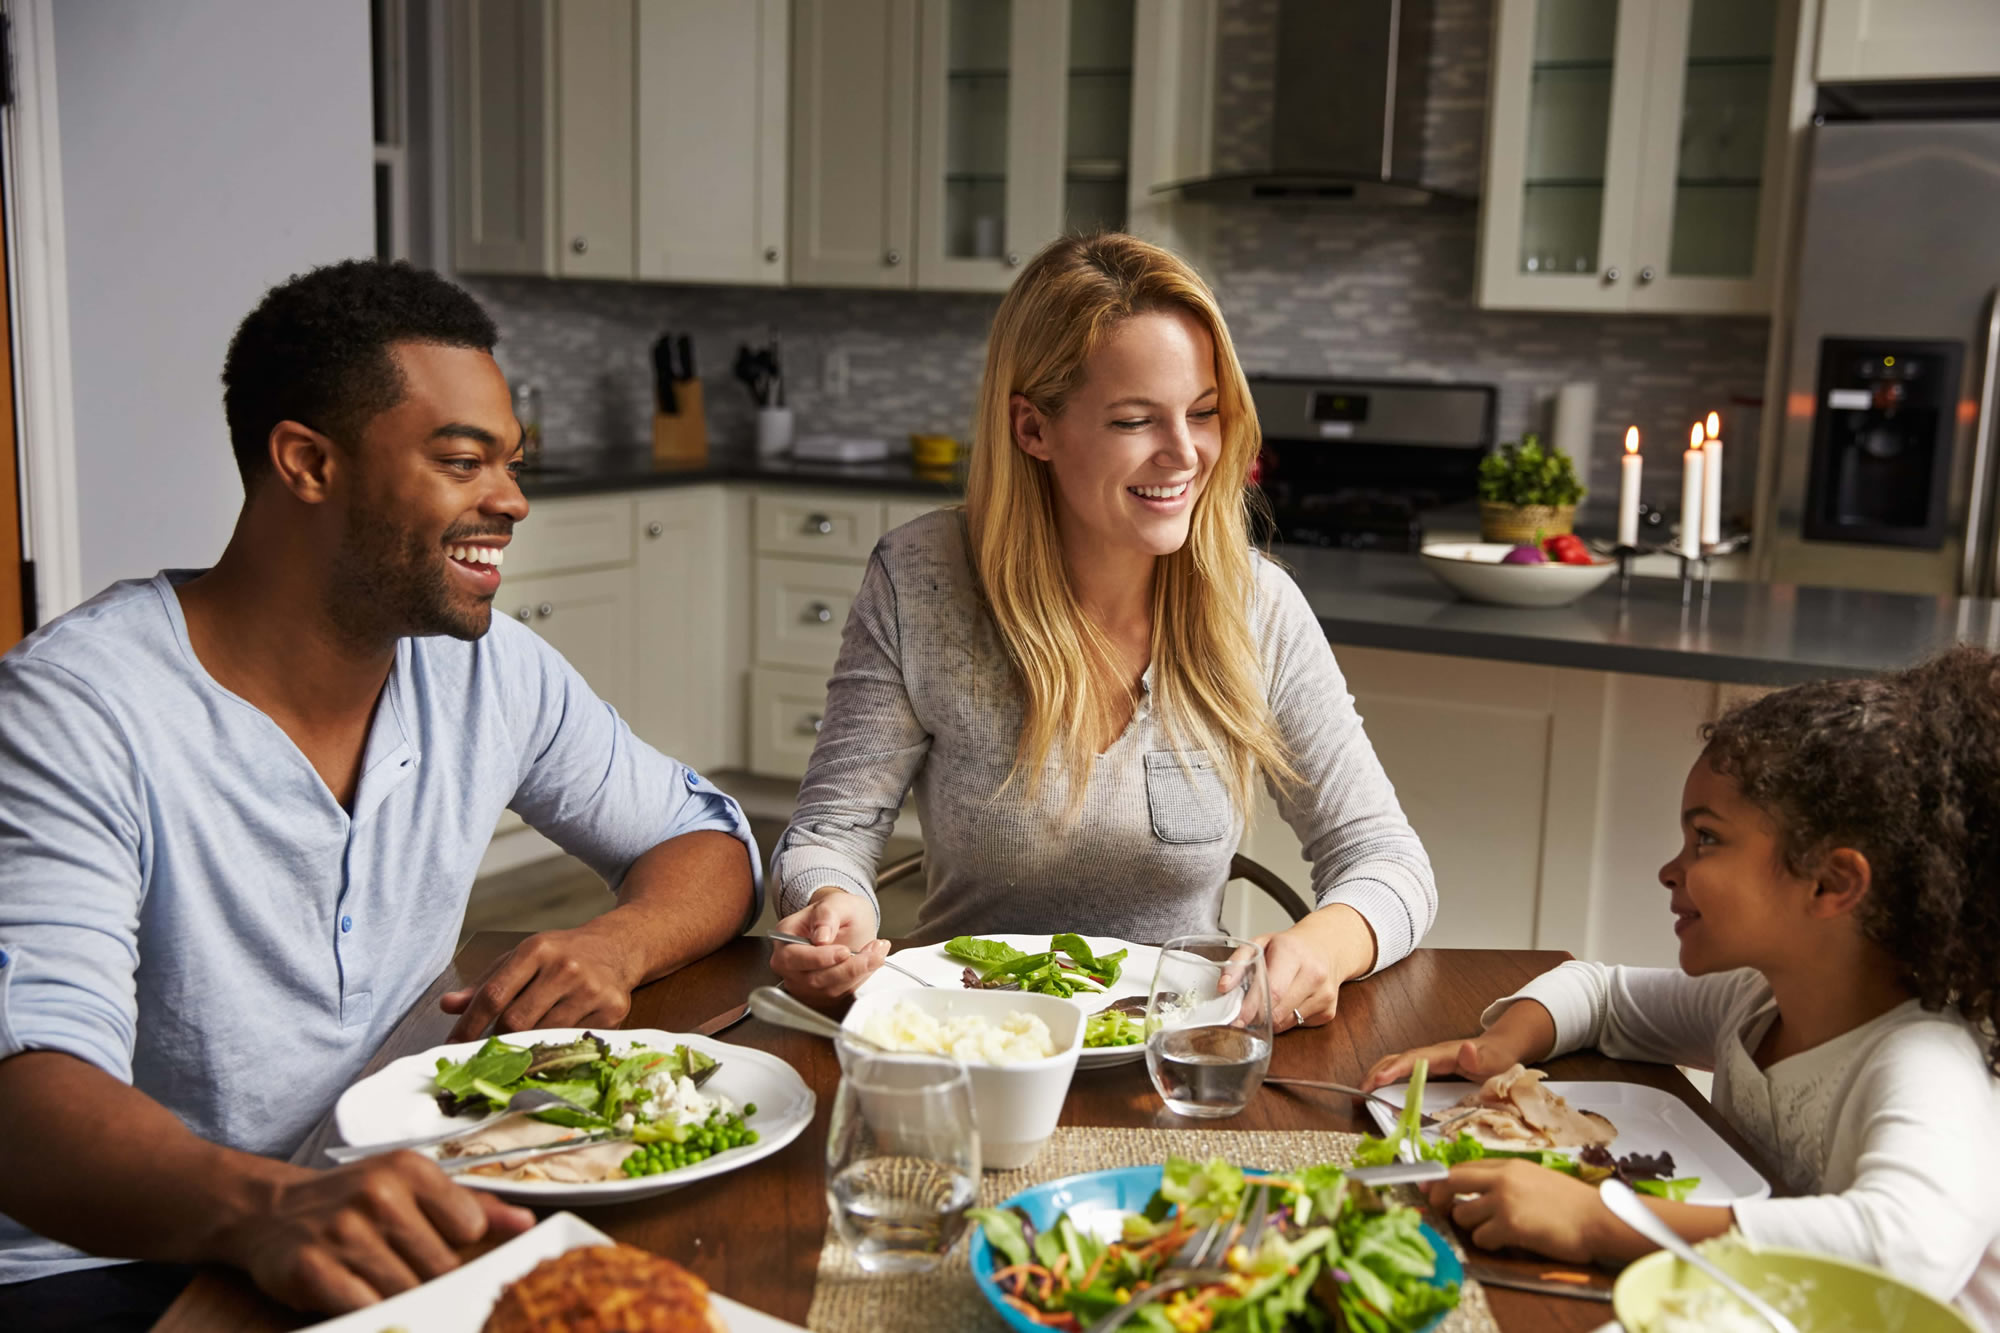 The importance of coming together at the dinner table once a week for improved communication